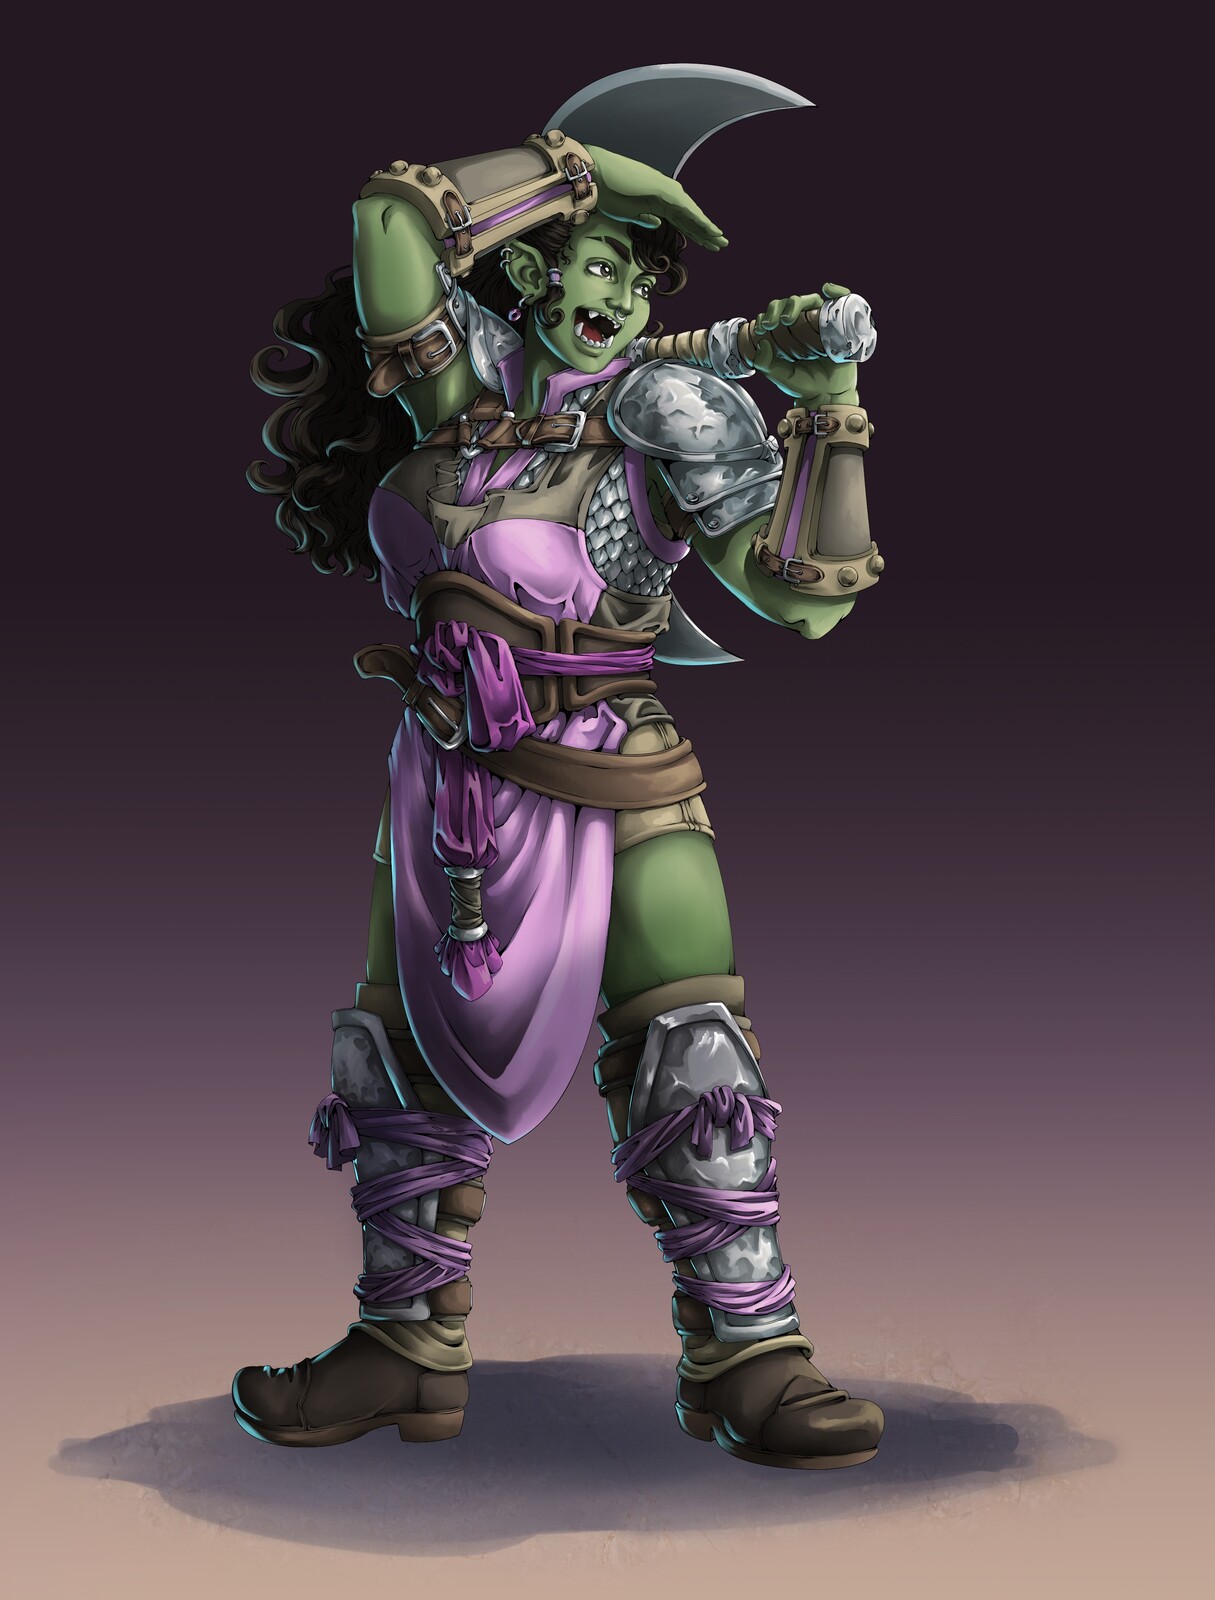 Mazoga: Orc Barbarian princess on a journey to see the world.